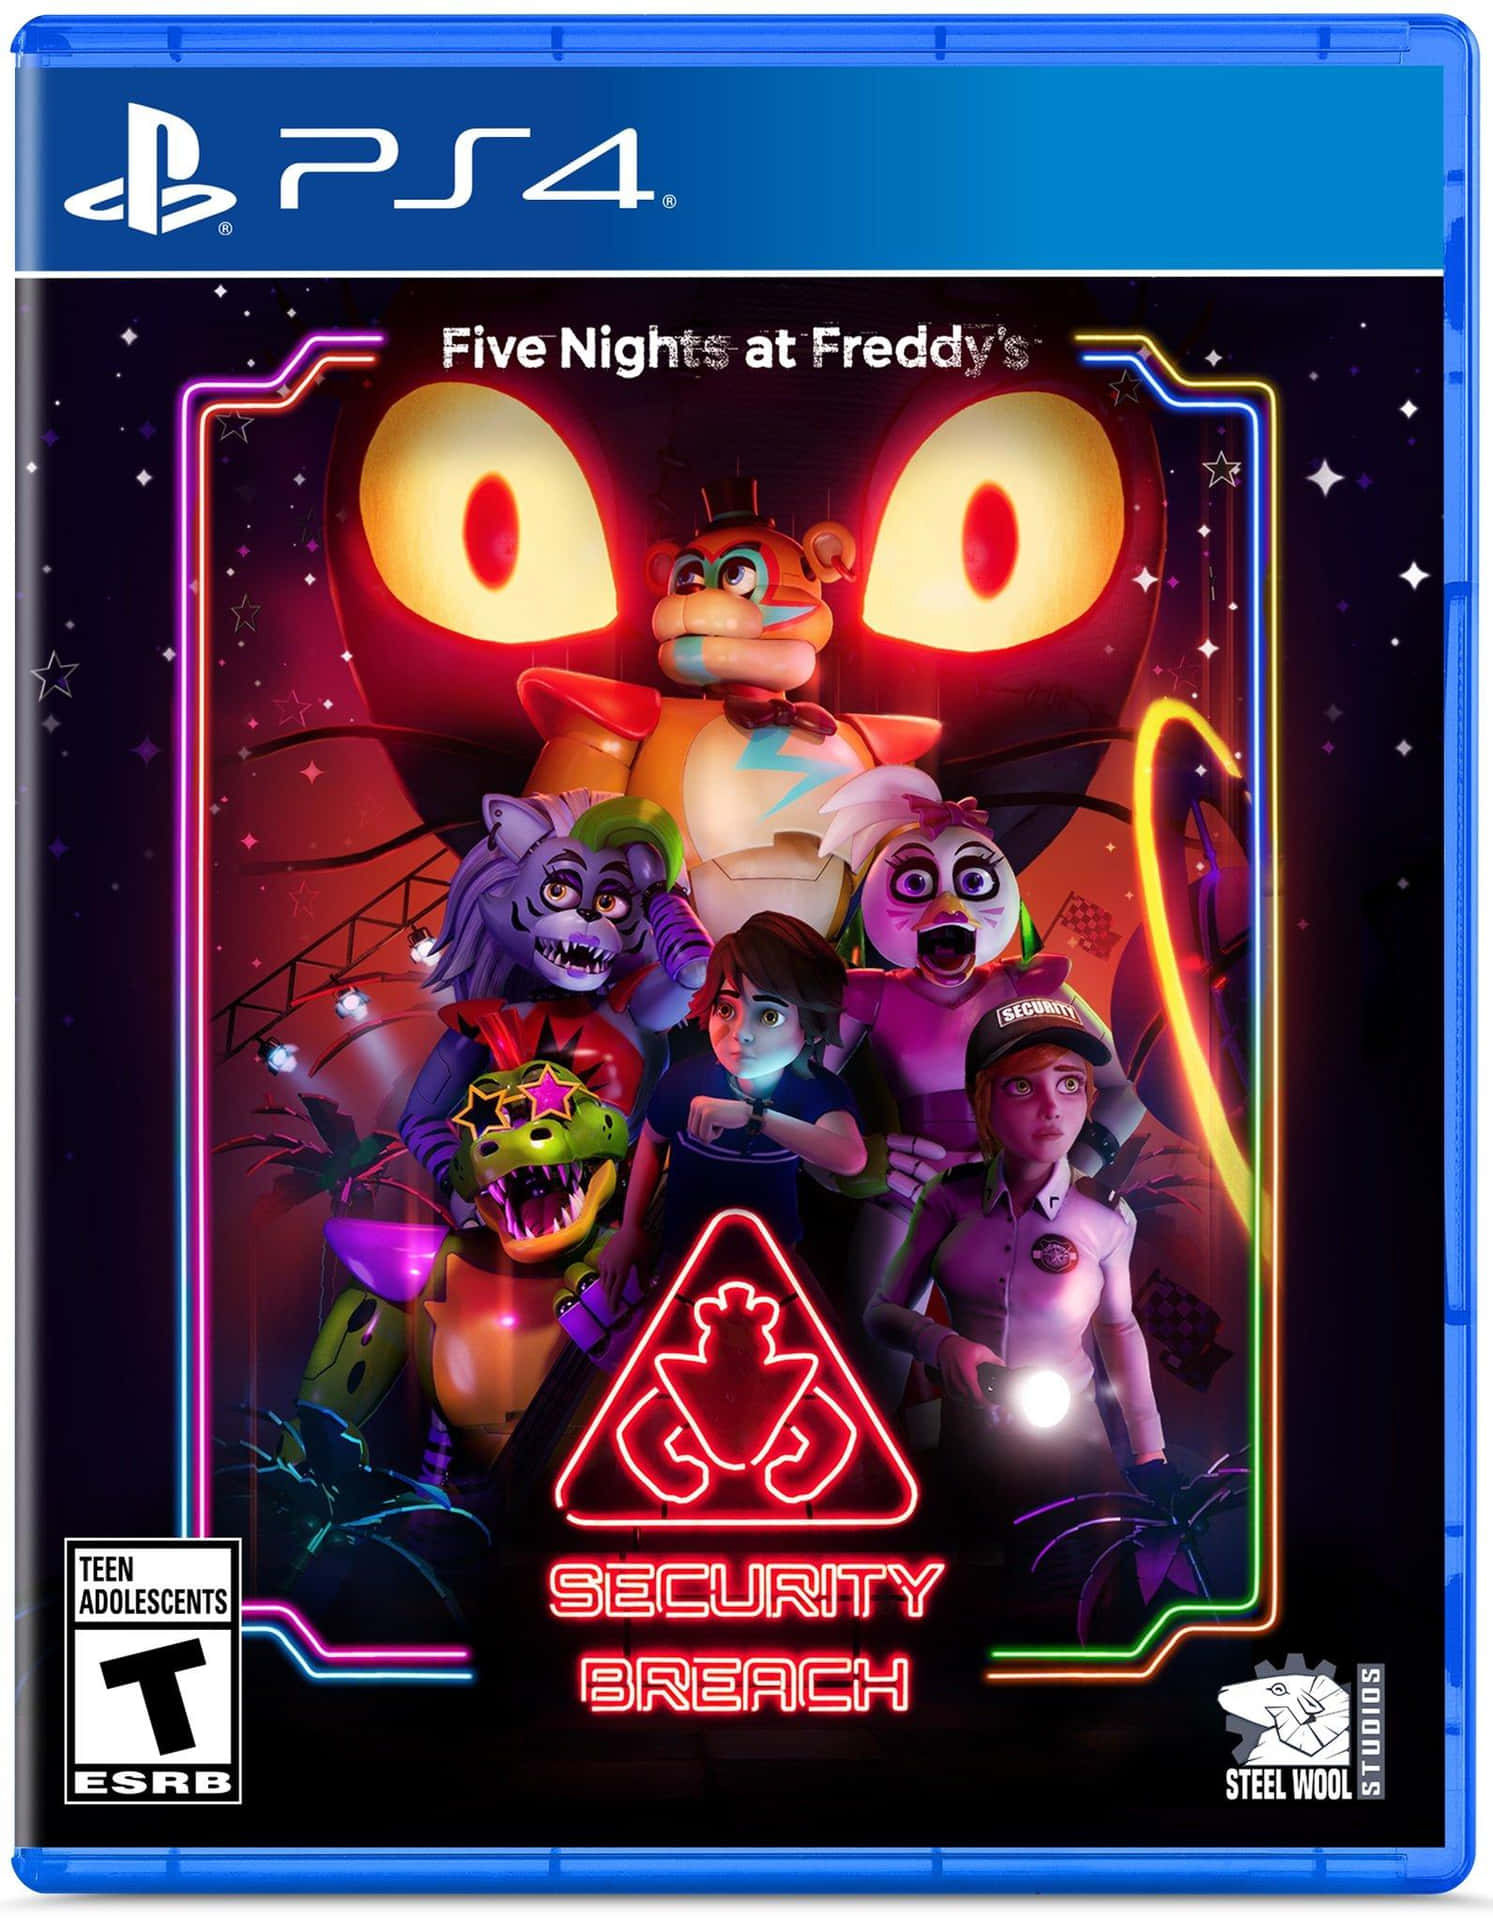 Come Play Five Nights At Freddy's